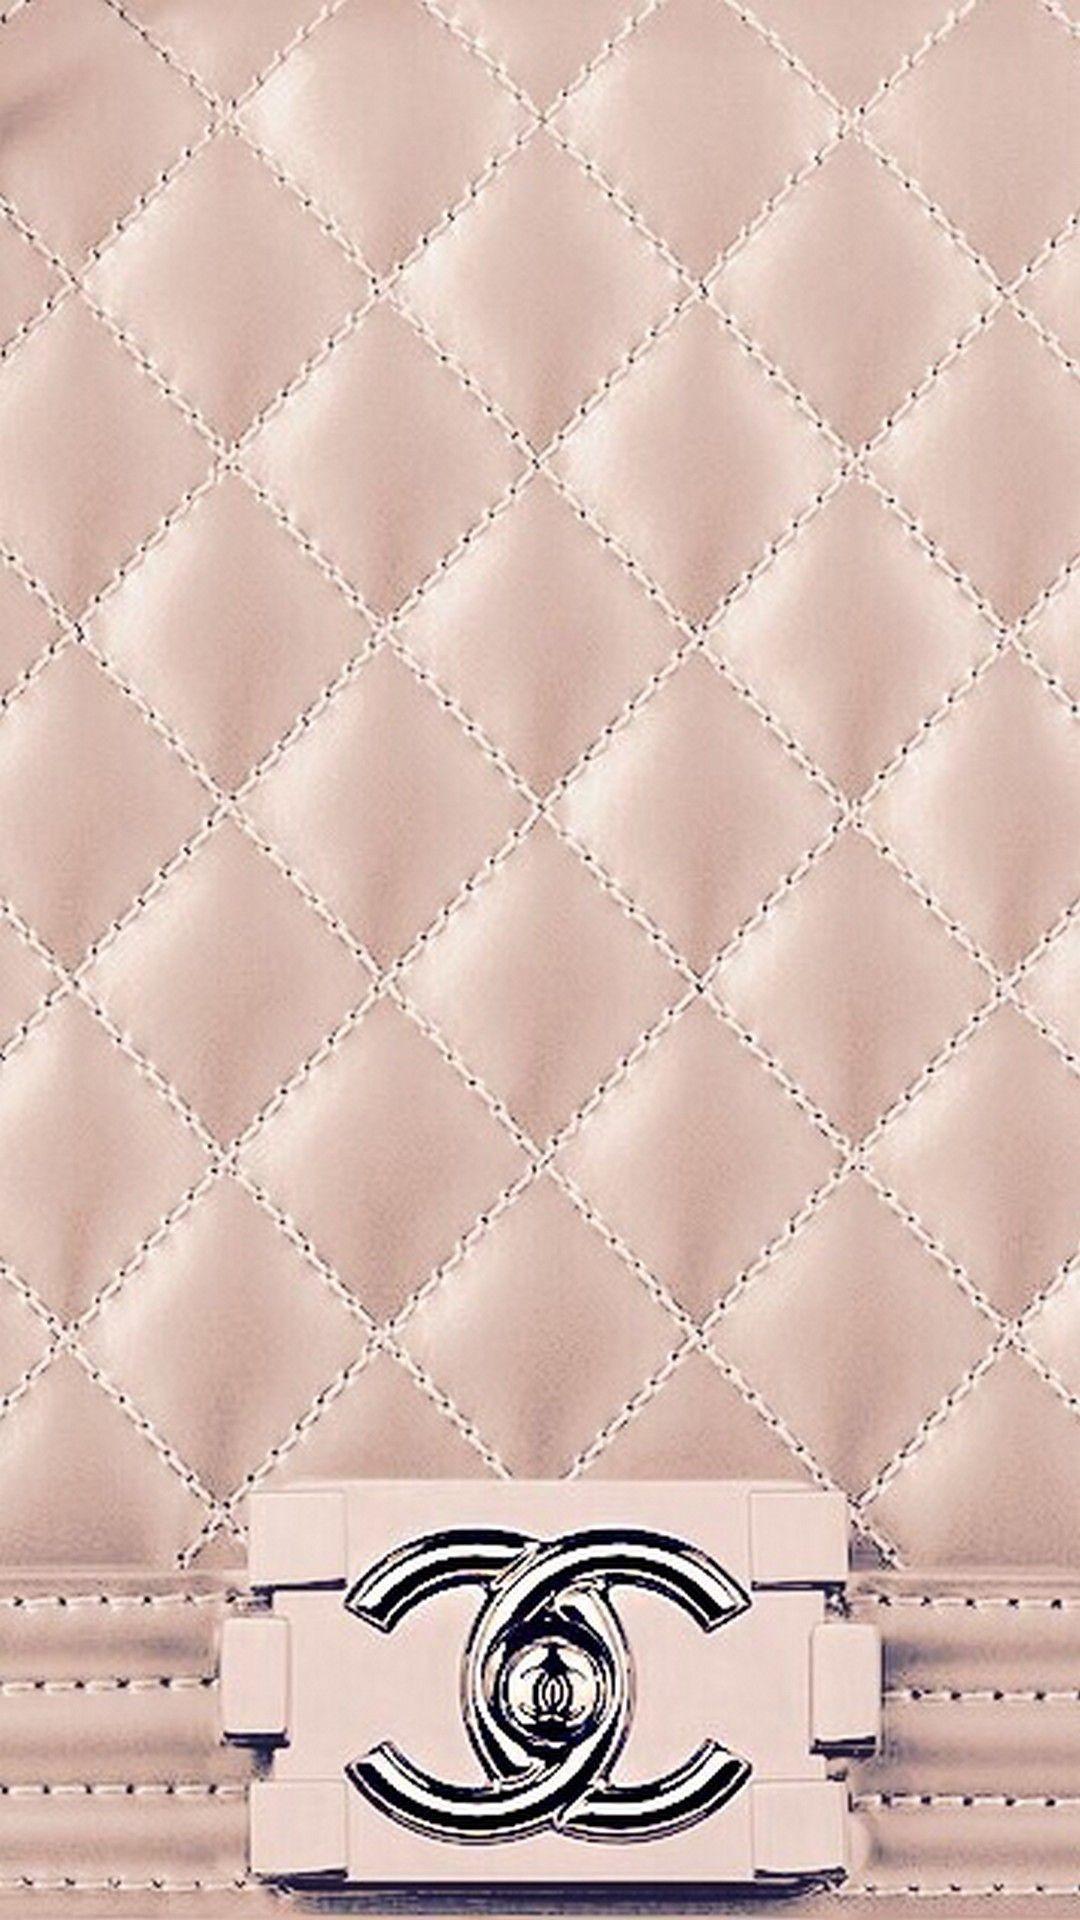 Chanel Aesthetic Wallpapers Wallpaper Cave See more ideas about chanel, chanel fashion, pink girly things. chanel aesthetic wallpapers wallpaper